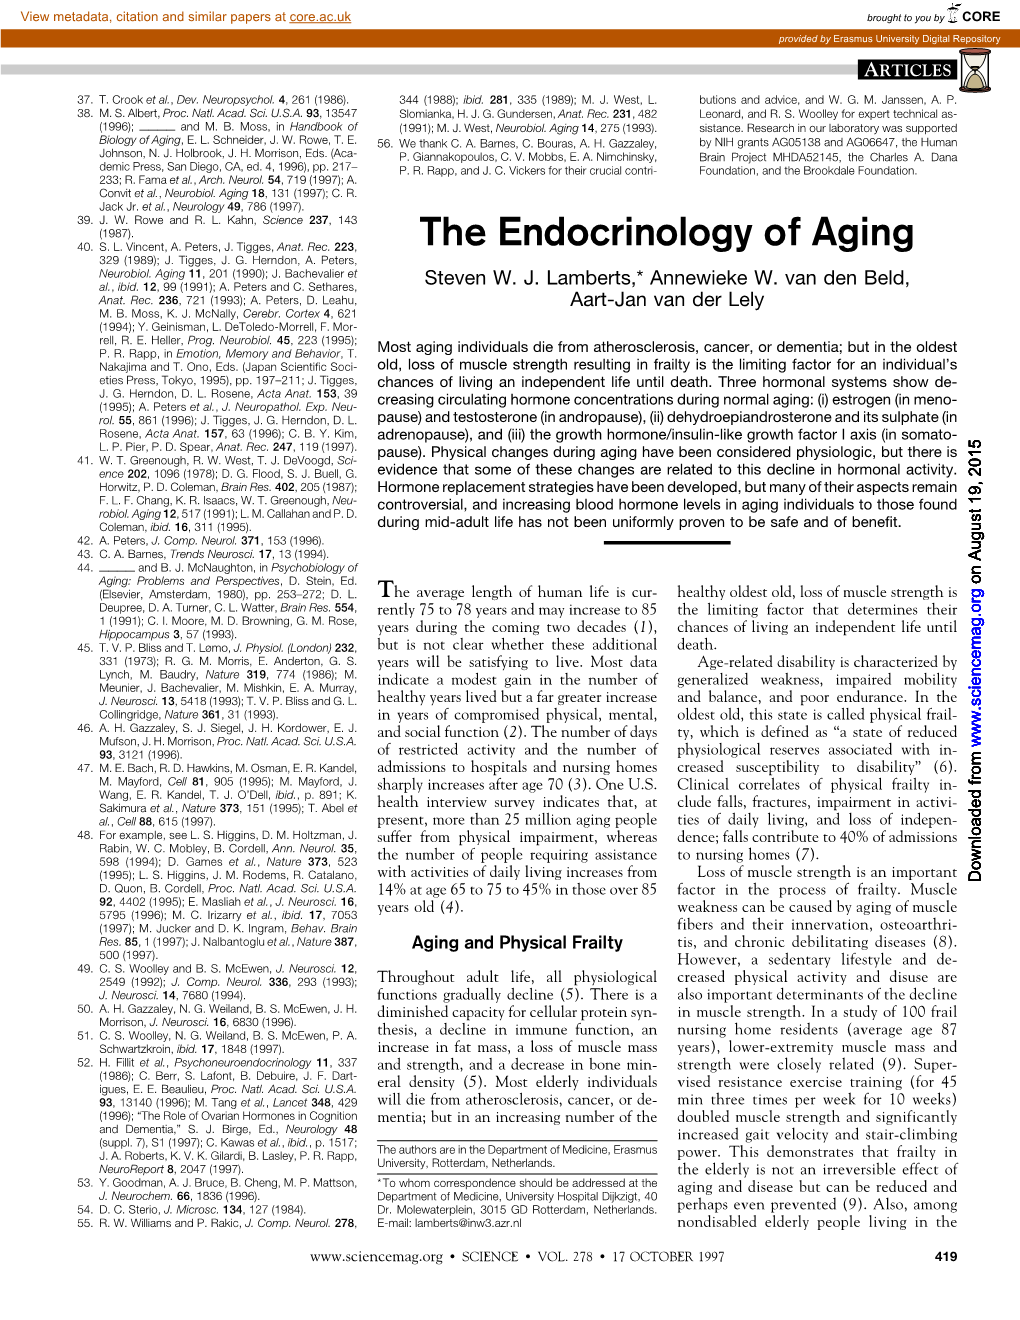 The Endocrinology of Aging 329 (1989); J